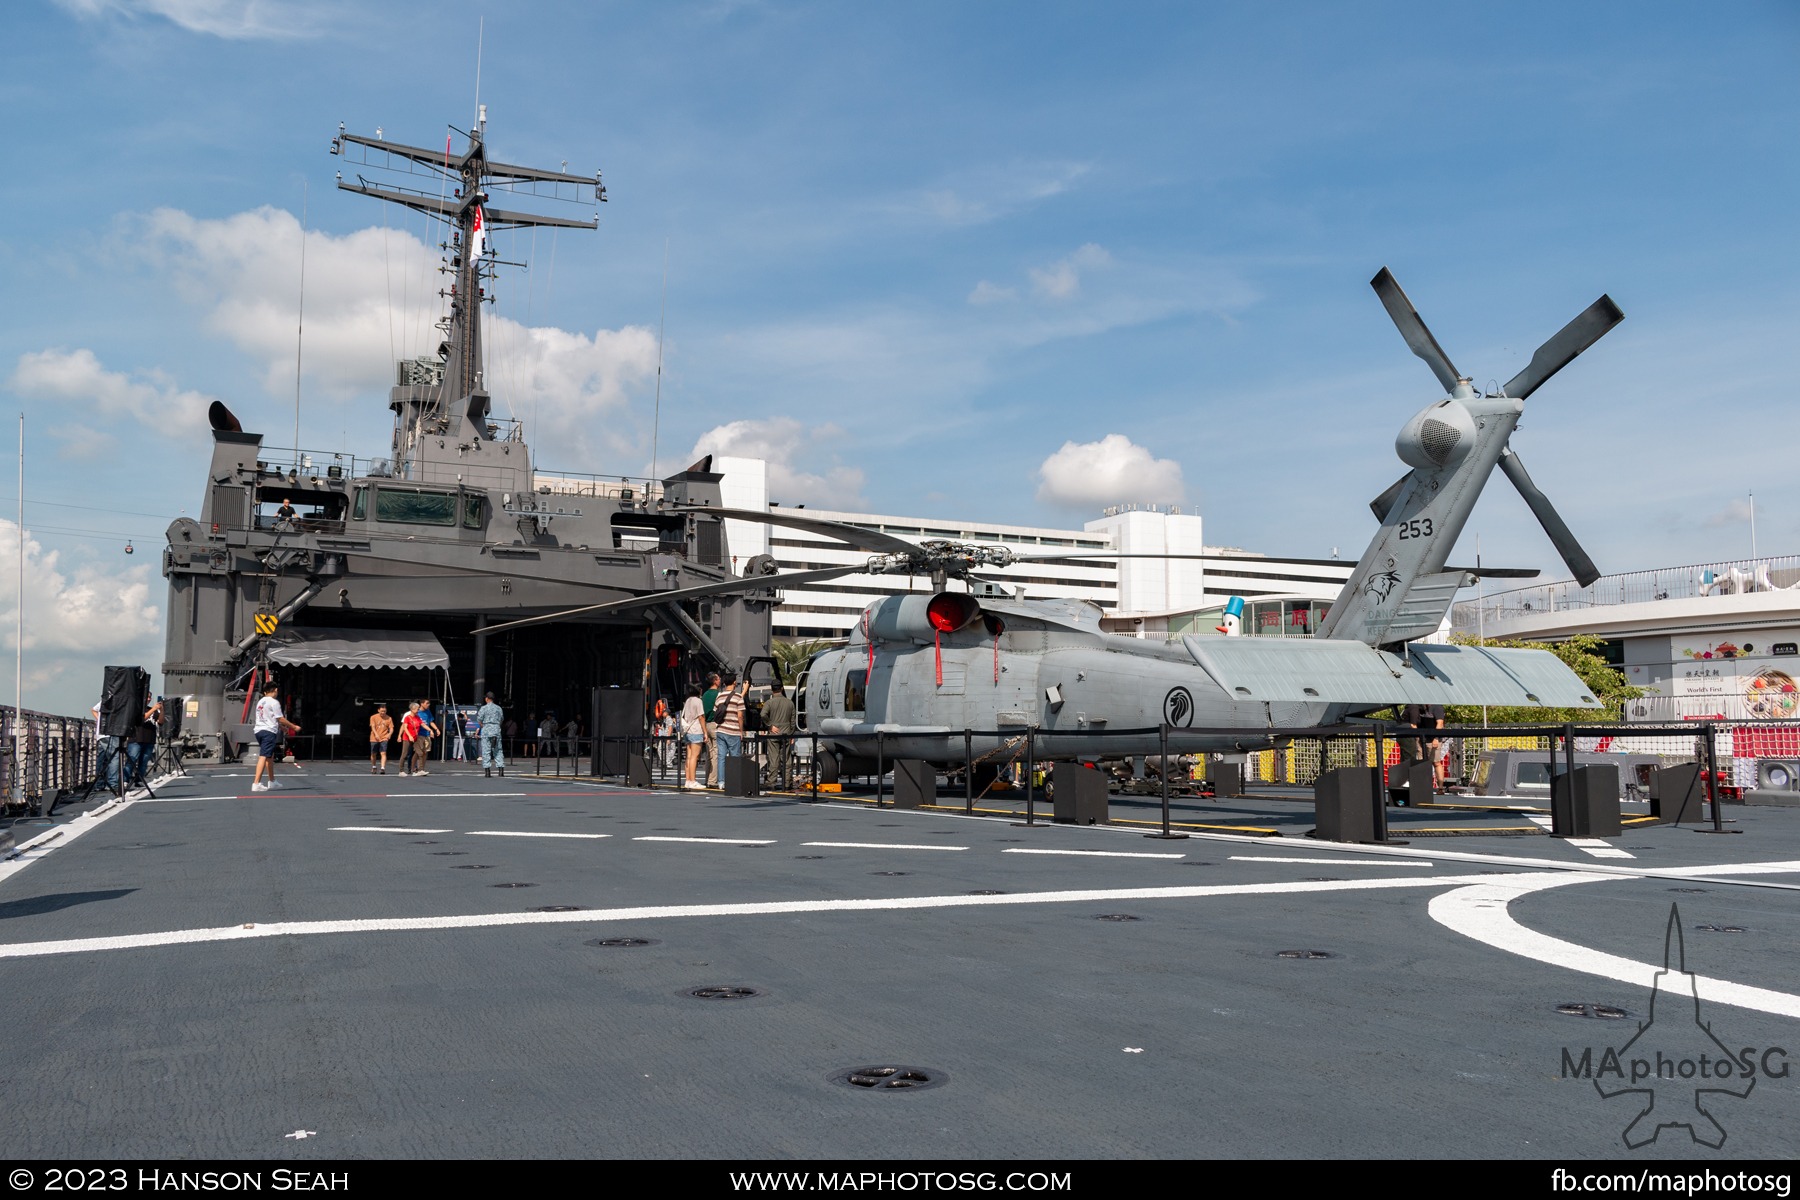 Deck of the RSS Endeavour and the accomanying S-70B Seahawk